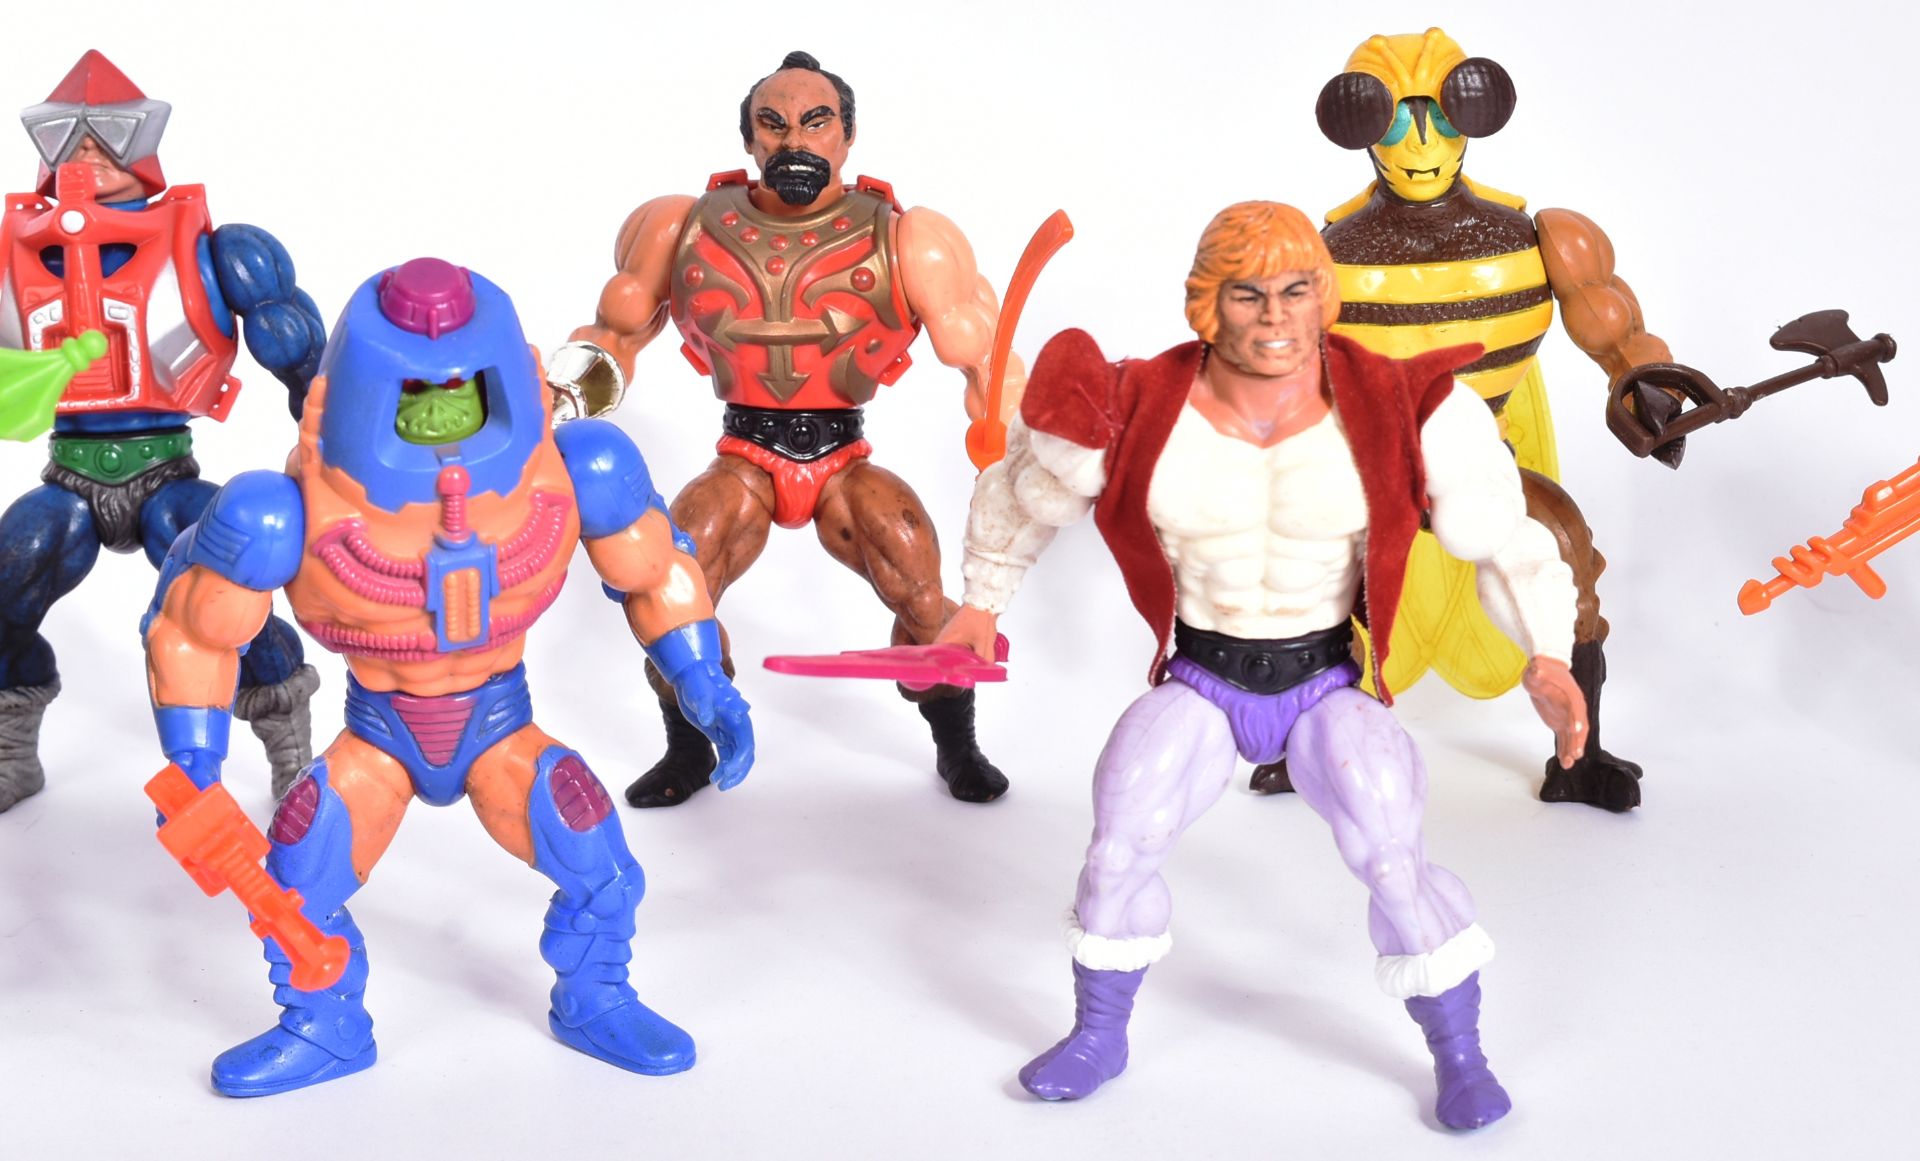 MASTERS OF THE UNIVERSE - VINTAGE MATTEL HE-MAN ACTION FIGURES - Image 2 of 5